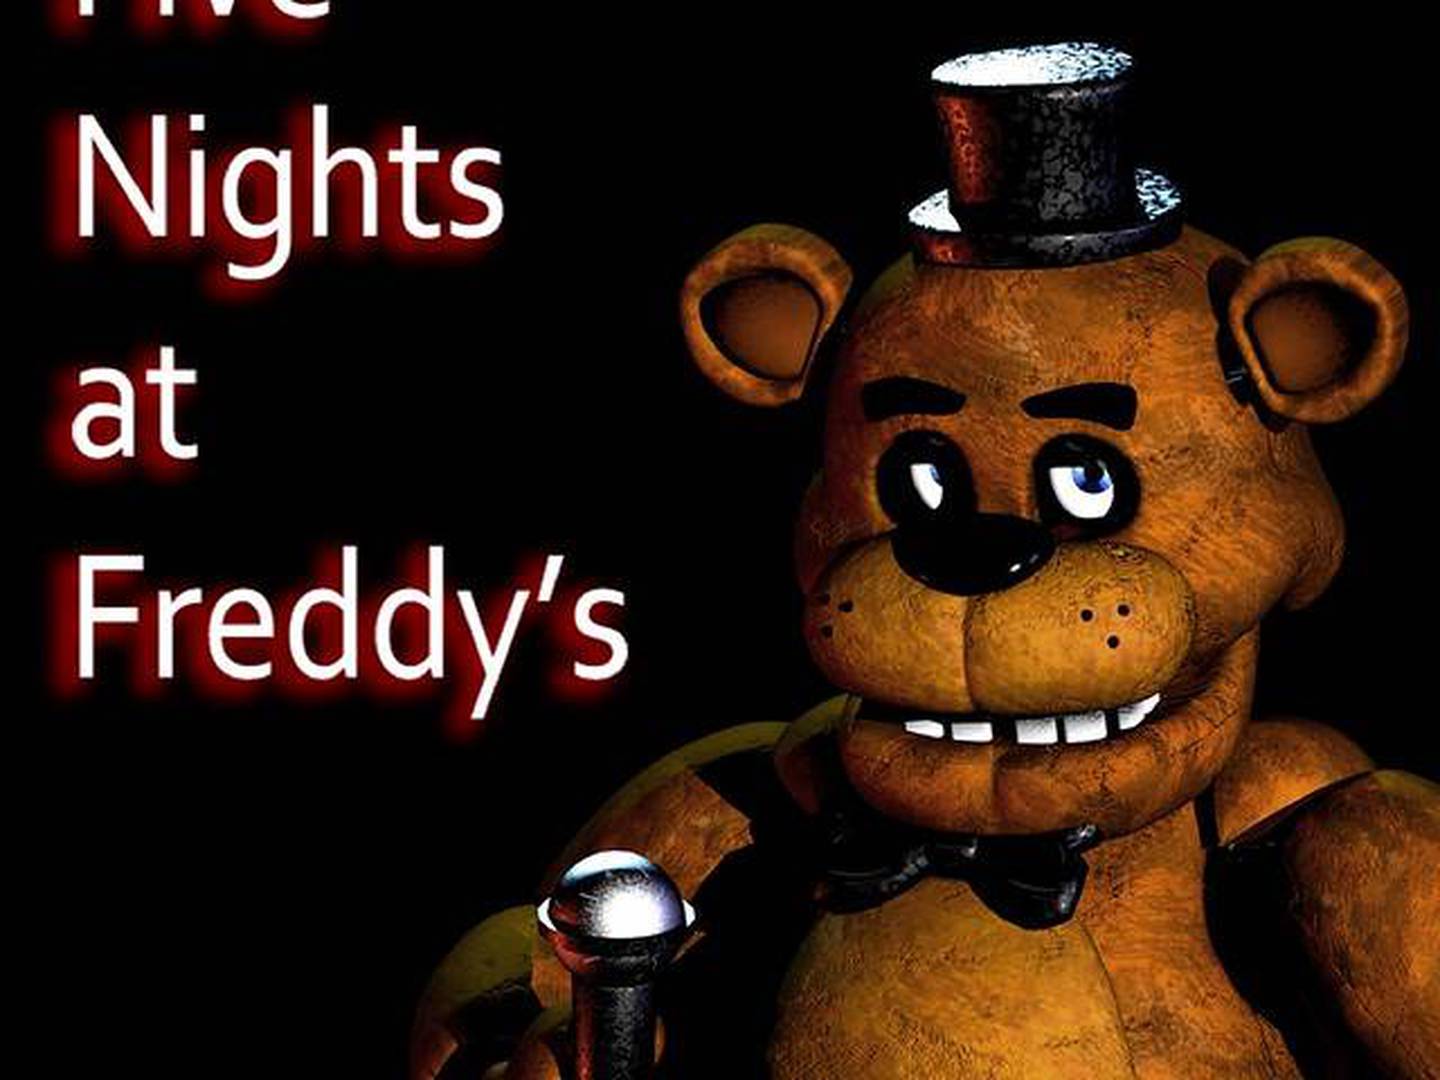 five night ats the freedy zodíac signo